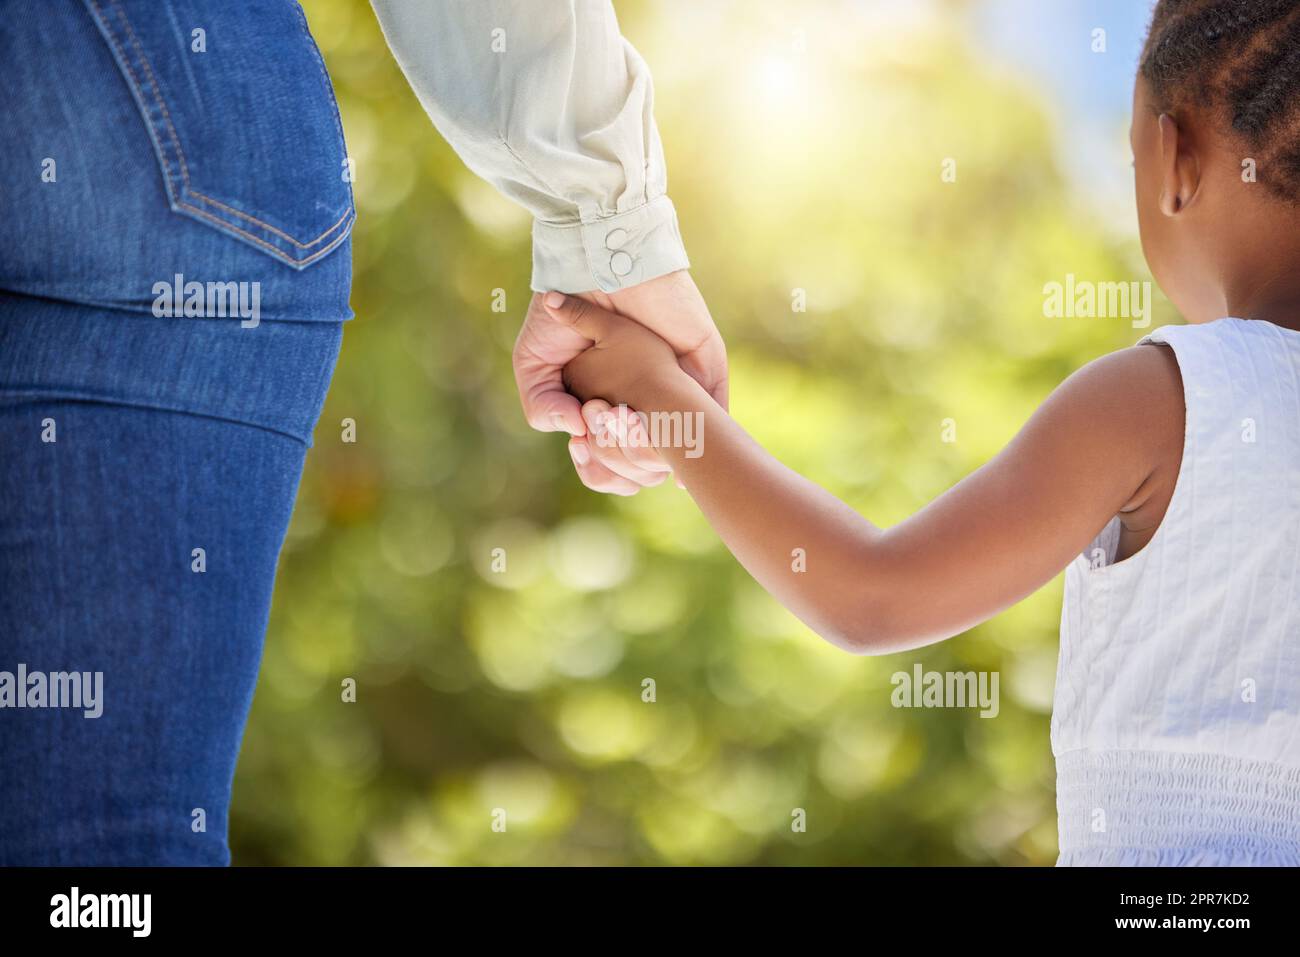 Lets go for a walk. an unrecognizable child and parent holding hands in nature. Stock Photo